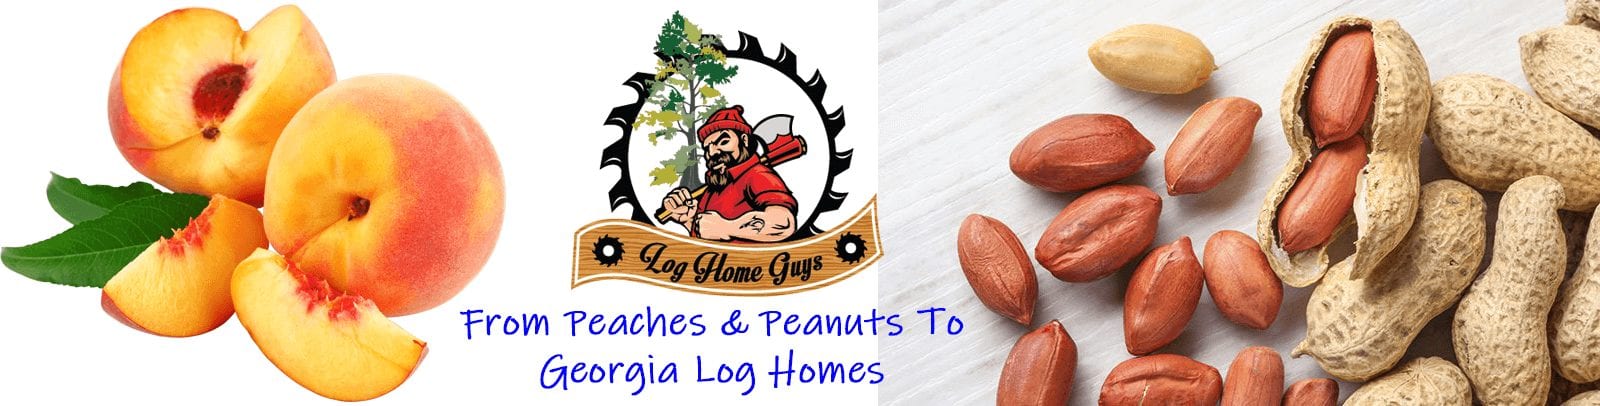 From Peaches & Peanuts, Log Home Guy's is your Georgia Log Homes Company